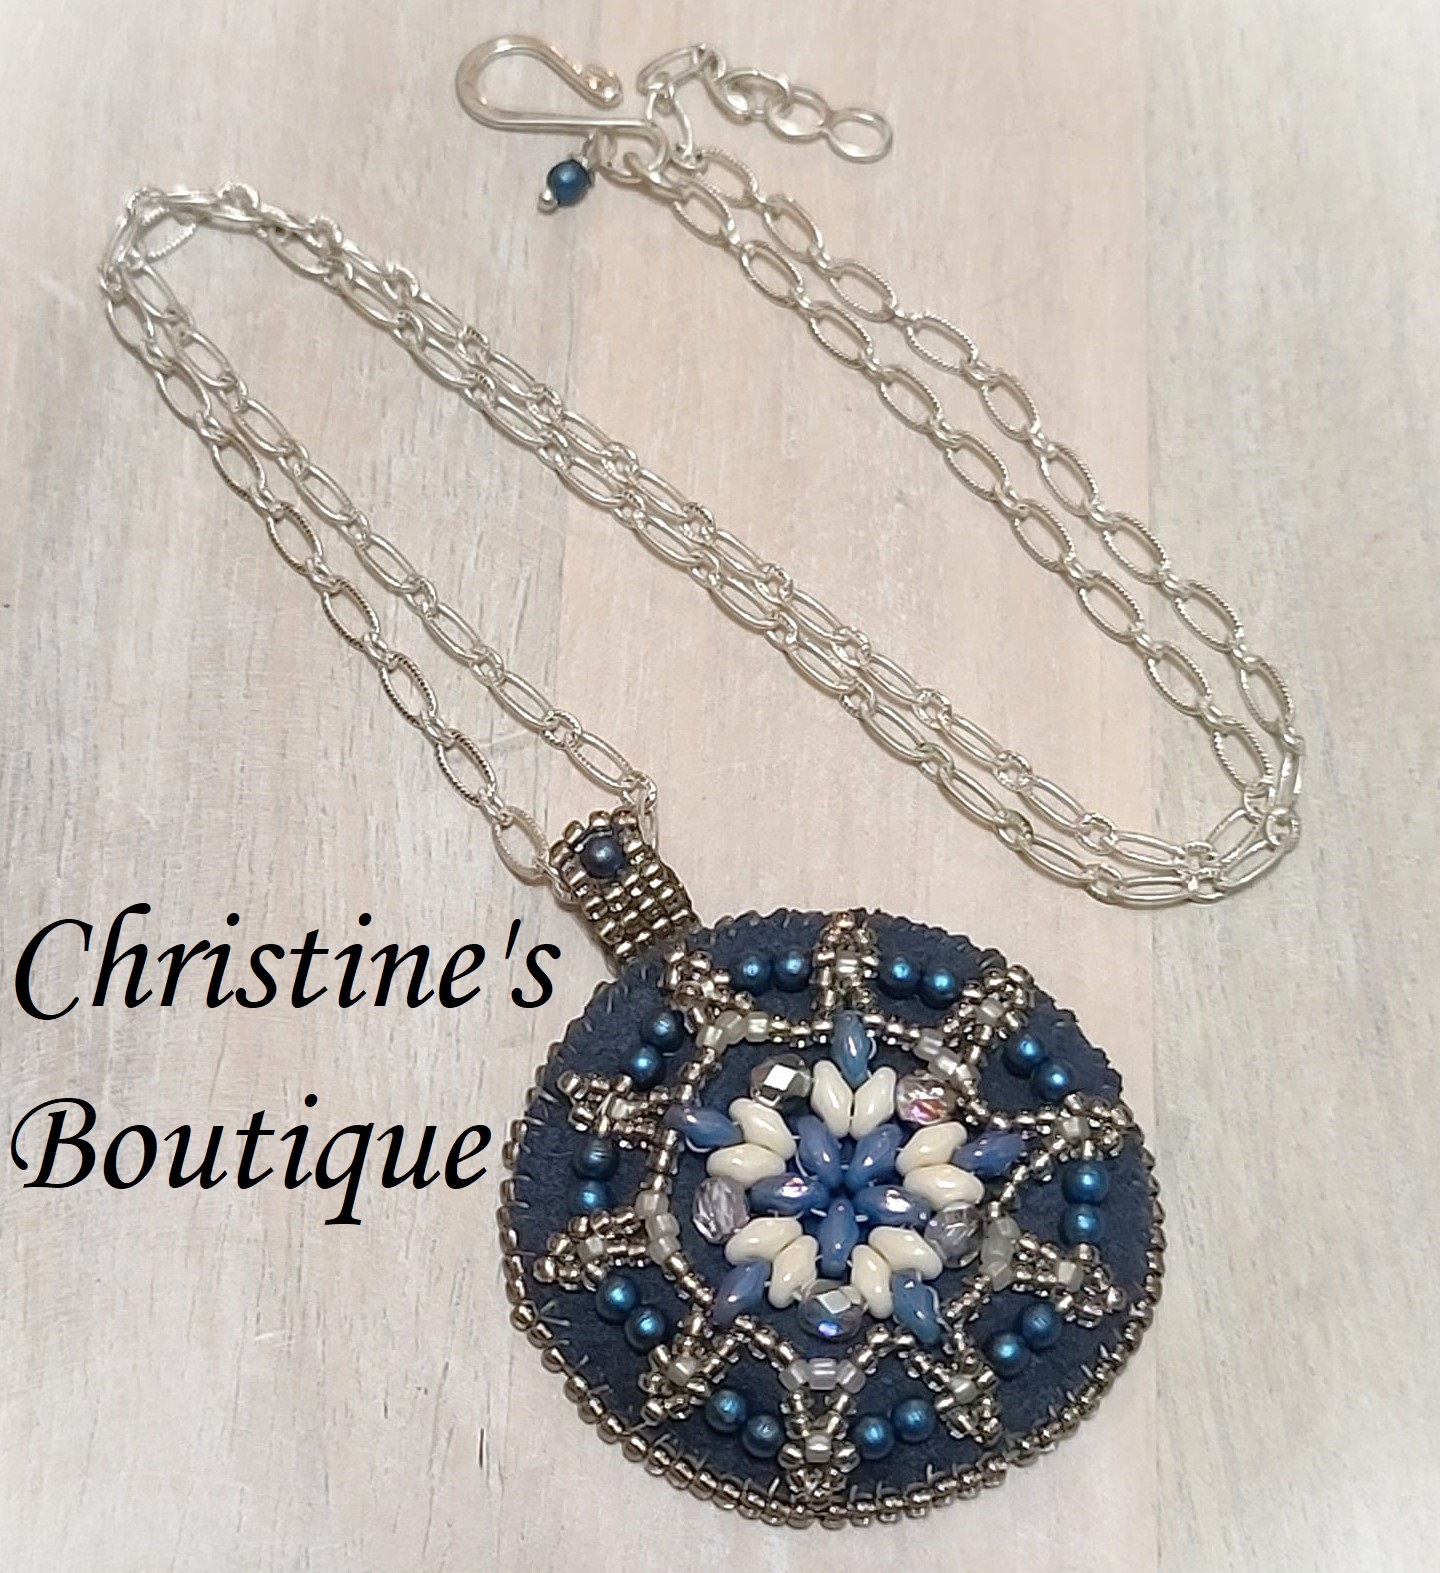 Bead embroidery medallion pendant necklace, blue suede, glass